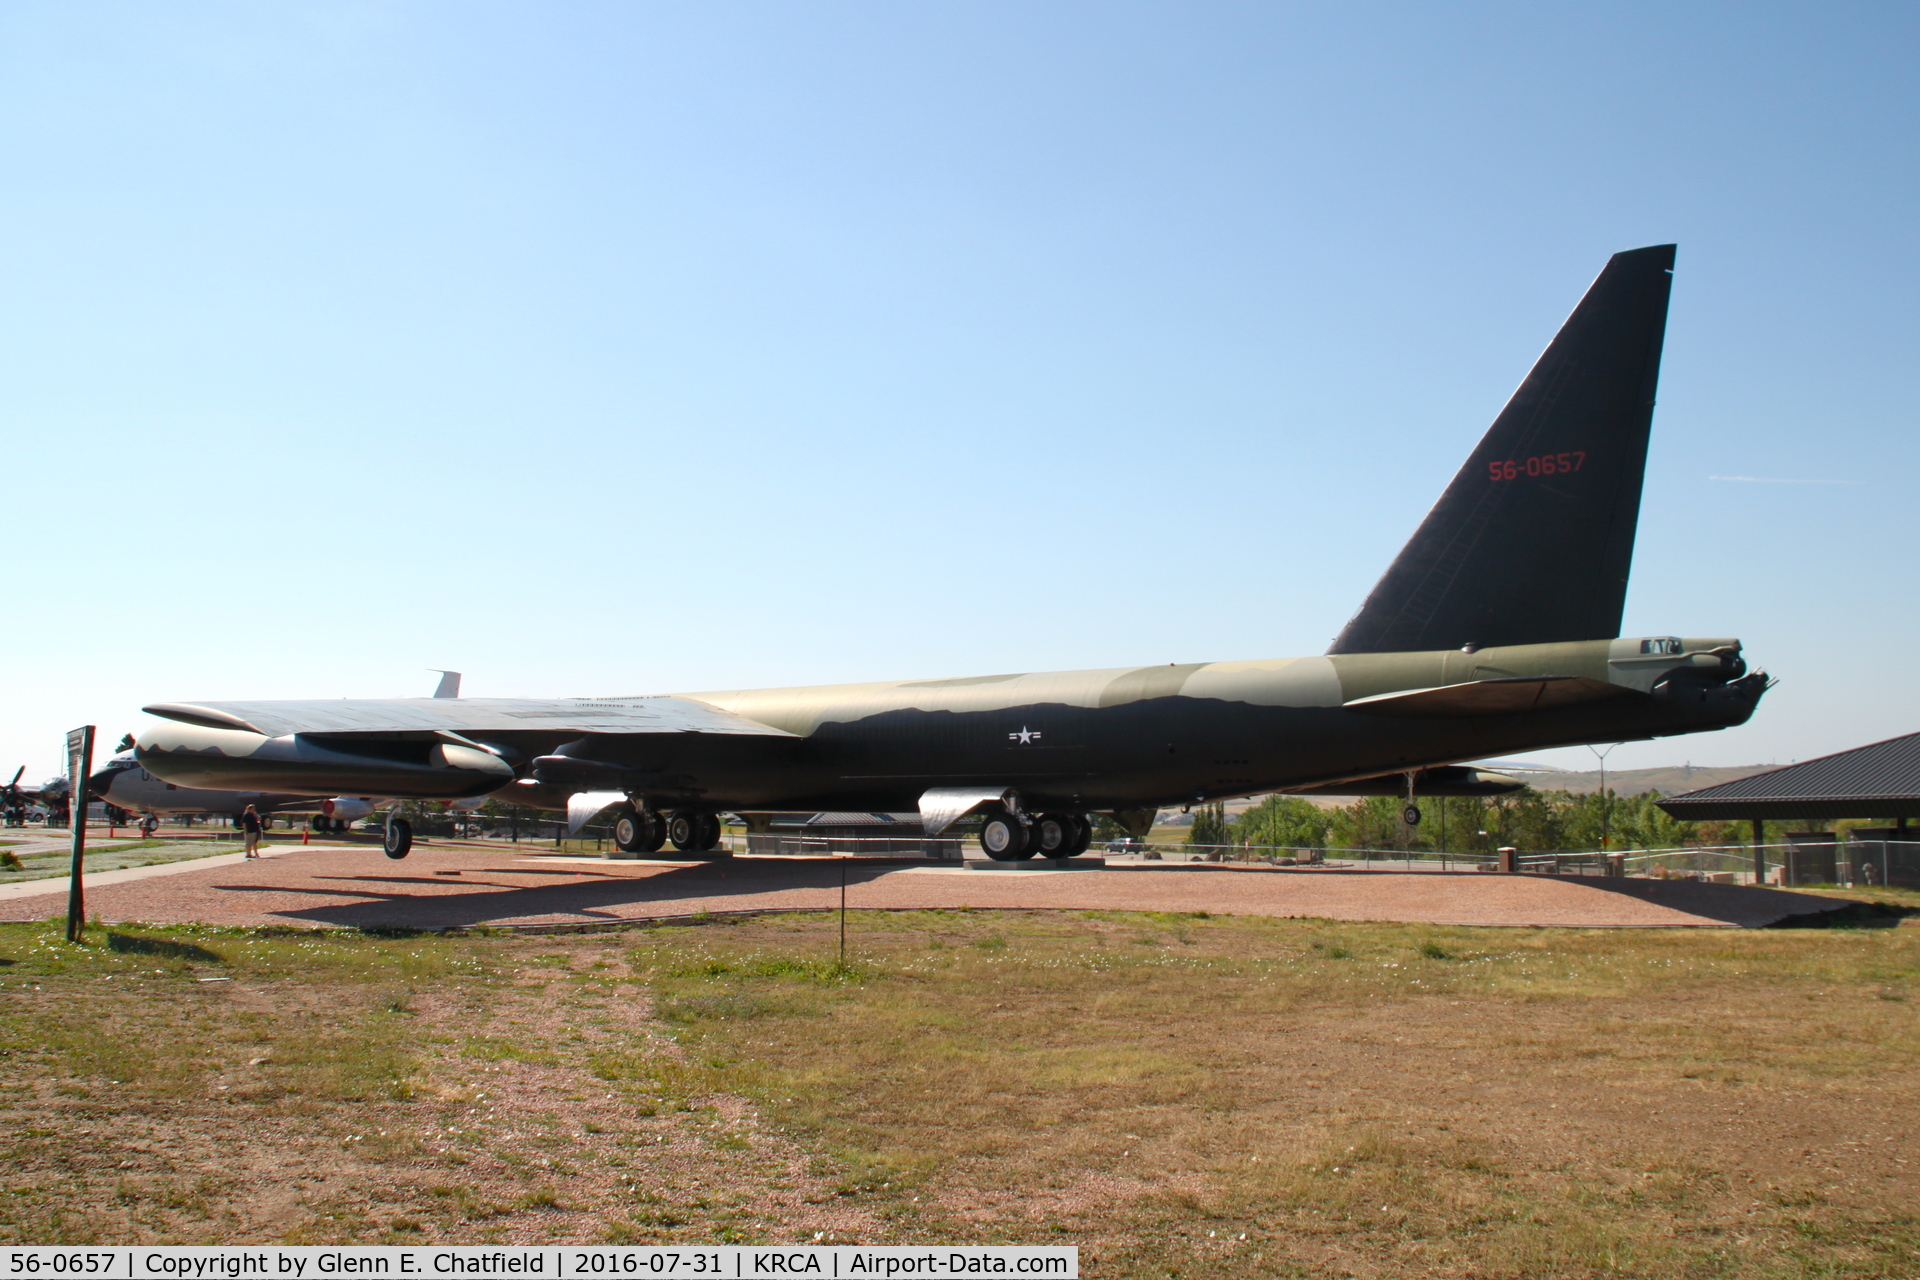 56-0657, 1956 Boeing B-52D-30-BW Stratofortress C/N 464028, At the South Dakota Air & Space Museum